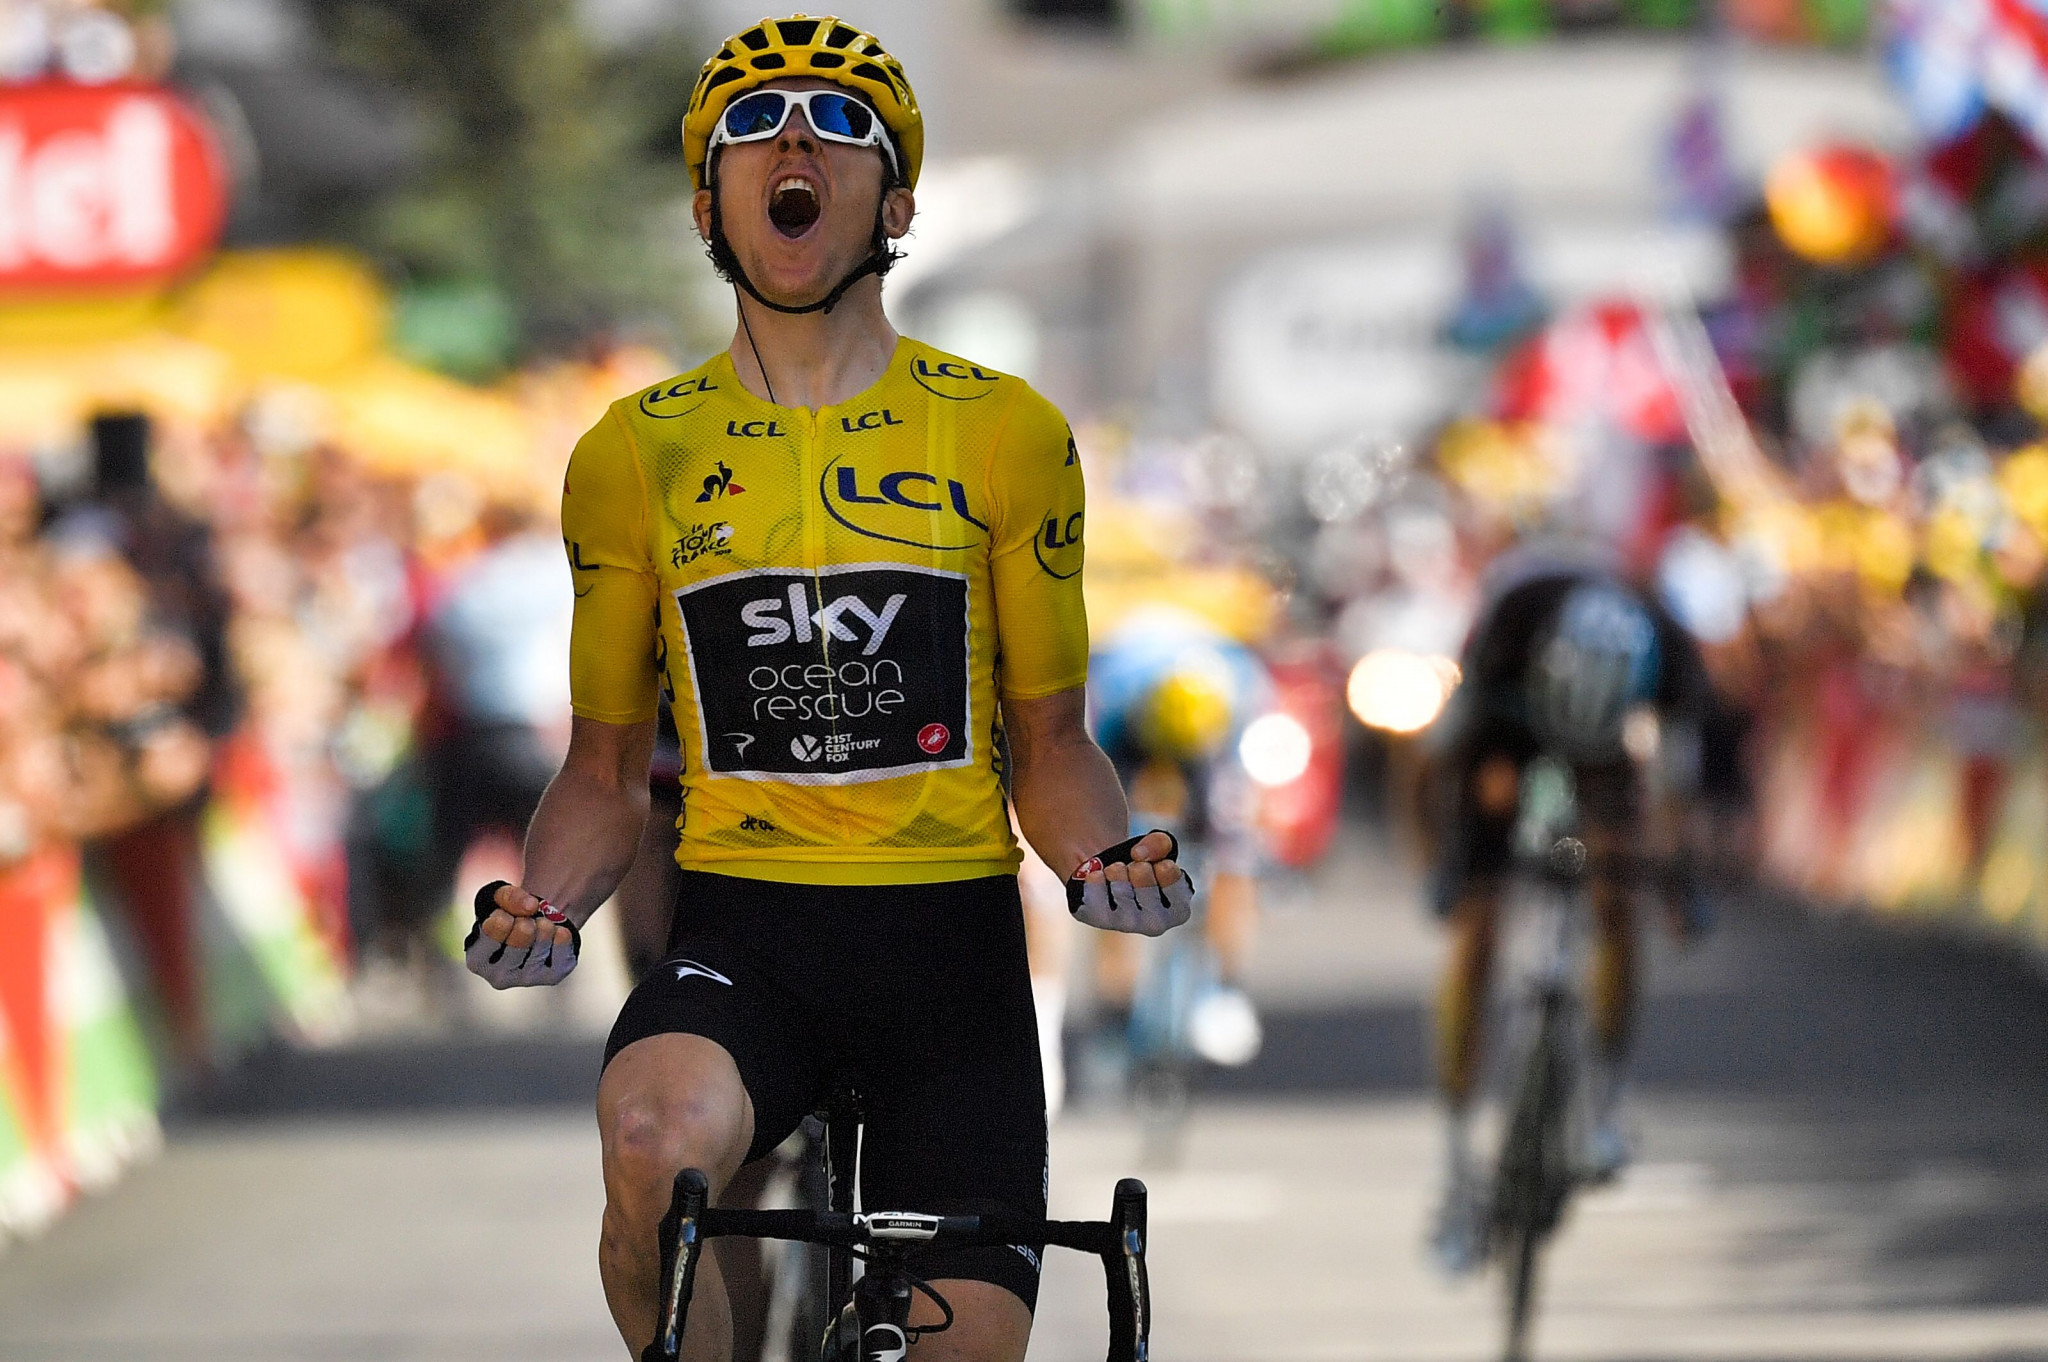 Thomas increases lead in yellow jersey with second Tour de France stage win in a row